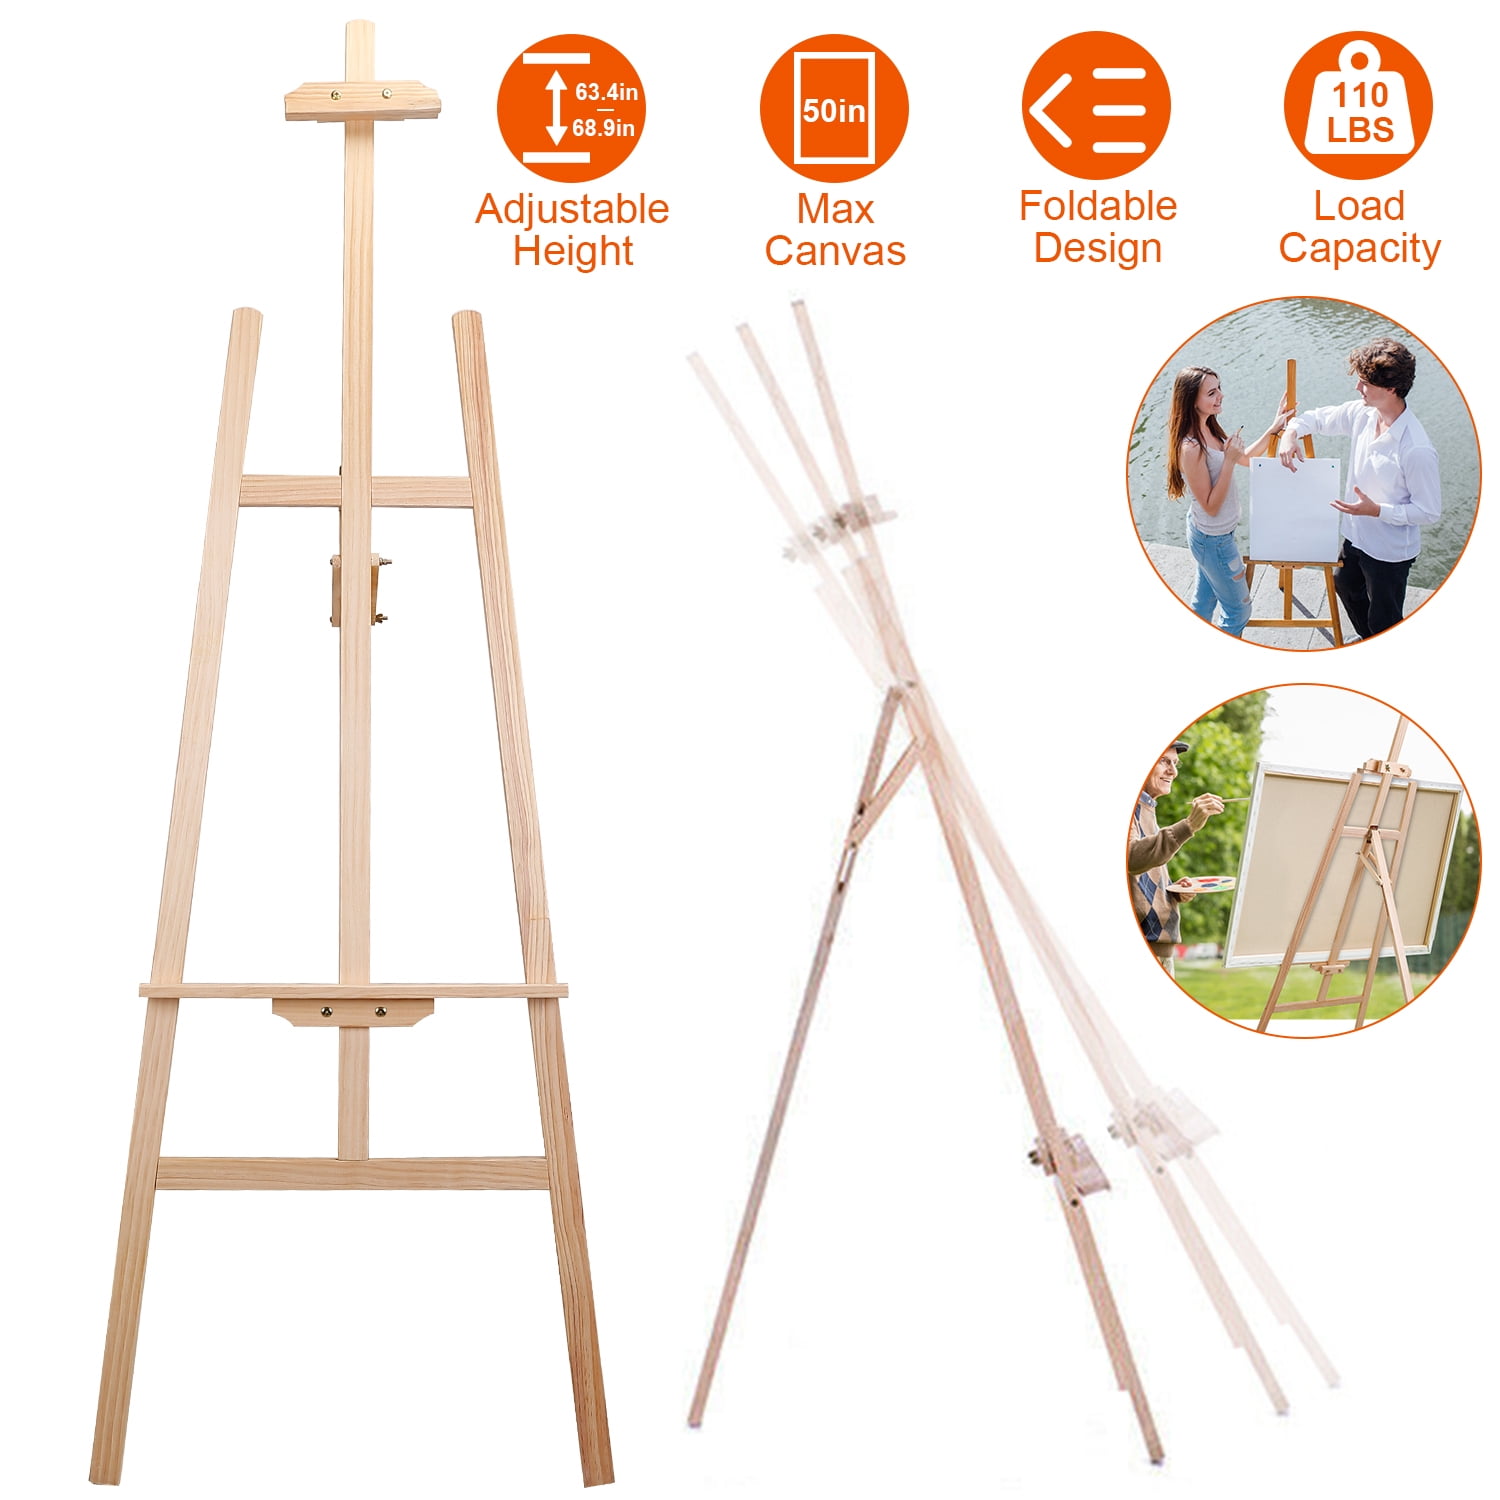 Dropship Painting Easel Stand Wooden Inclinable A Frame Tripod Easel  Drawing Stand With 63.4 In-68.9in Adjustable Height Hold Canvas Up To 50in  to Sell Online at a Lower Price